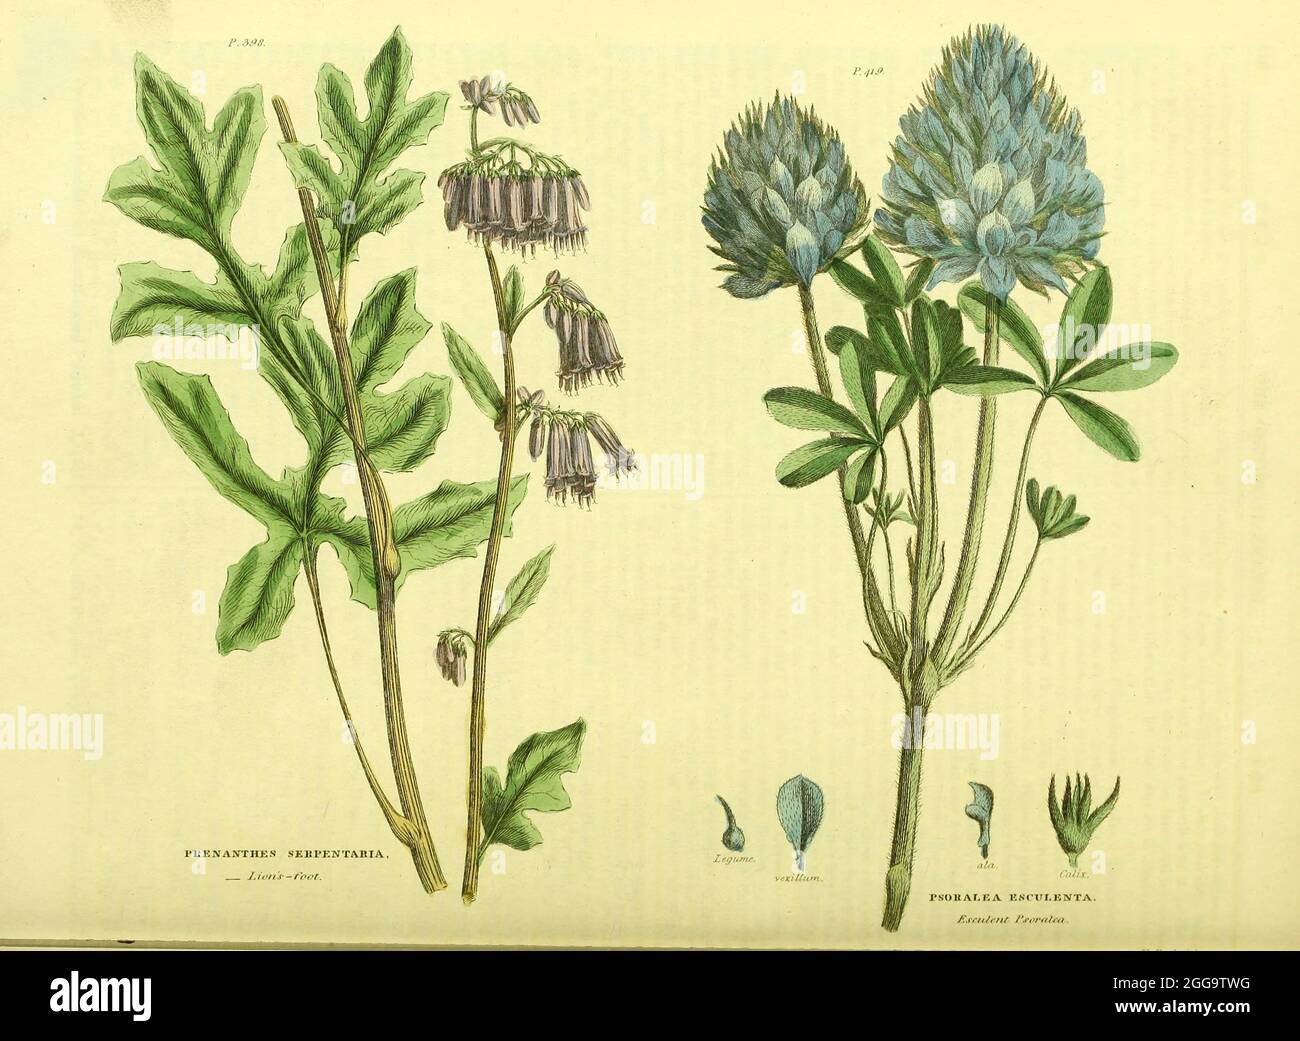 Prenanthens serpentaria [Lions-foot], Psoralea esculenta [Esculent Psoralca] from Vol II of the book The universal herbal : or botanical, medical and agricultural dictionary : containing an account of all known plants in the world, arranged according to the Linnean system. Specifying the uses to which they are or may be applied By Thomas Green,  Published in 1816 by Nuttall, Fisher & Co. in Liverpool and Printed at the Caxton Press by H. Fisher Stock Photo